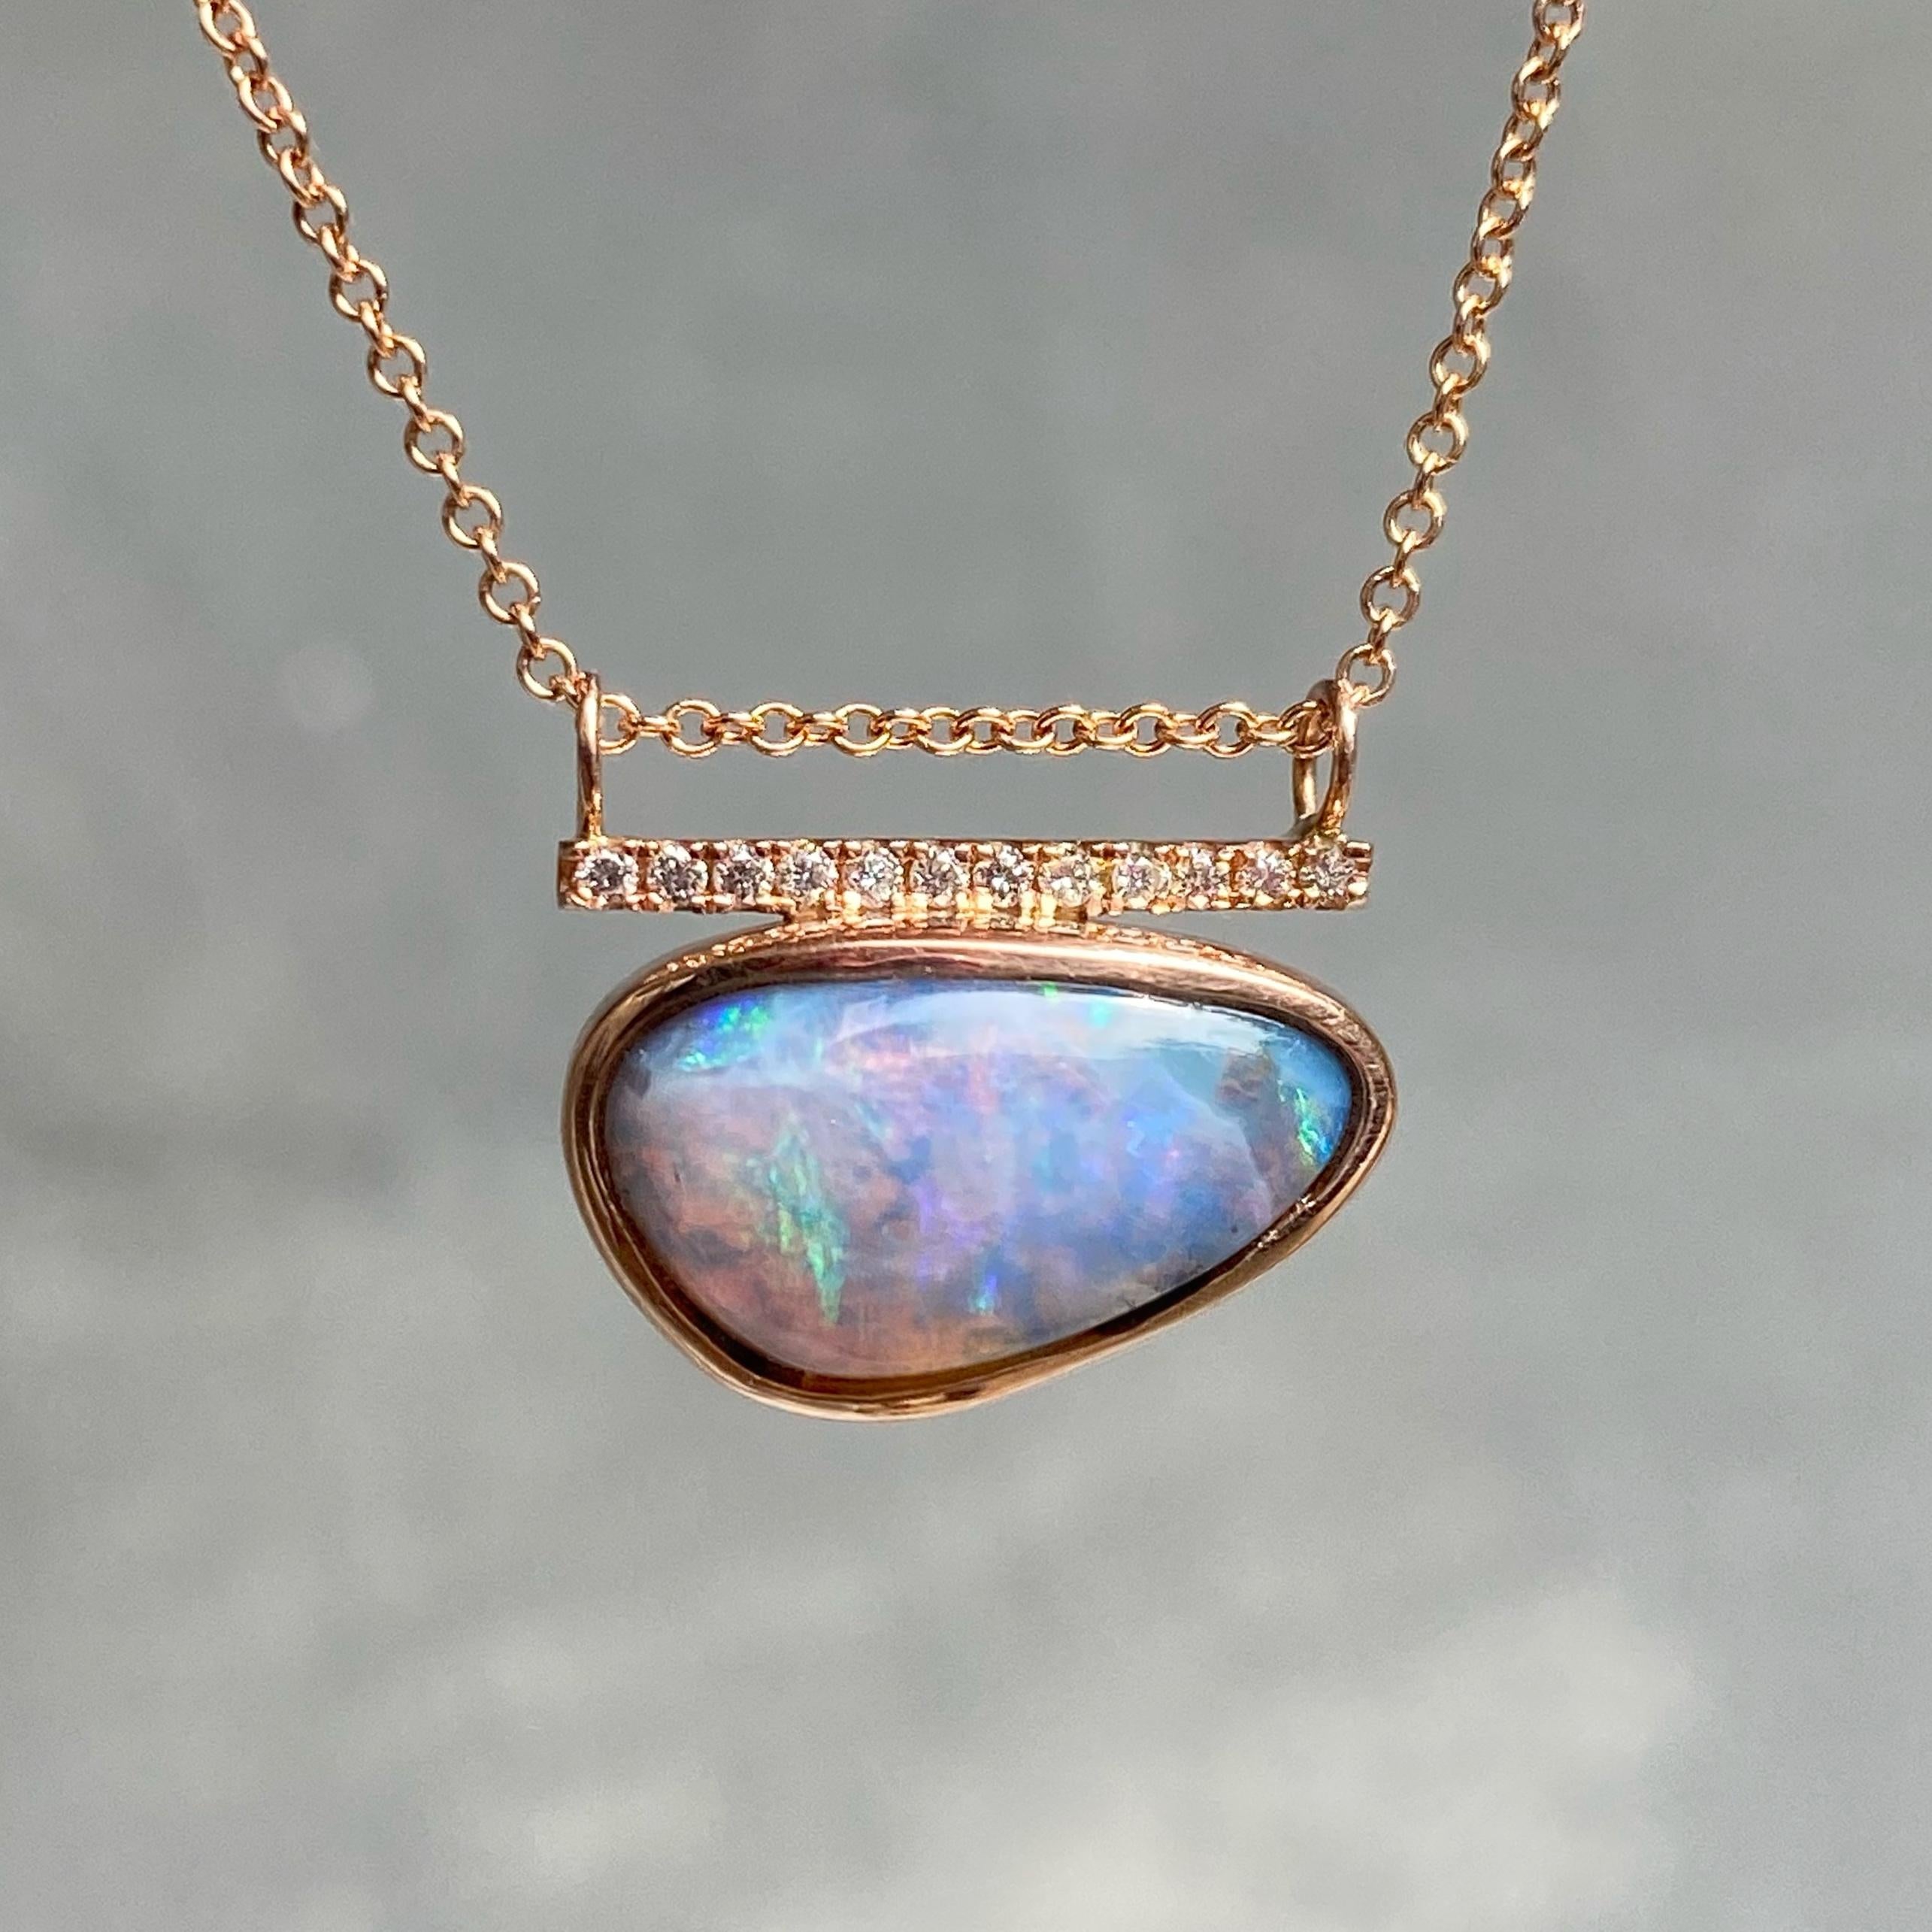 A mystical smoky Boulder Opal slides with grace in the Head in the Clouds Rose Gold Opal Necklace No. 15.  The high dome of the purple opal plays with light as it passes through the stone, casting quick glances of pink and blue and waves of emerald